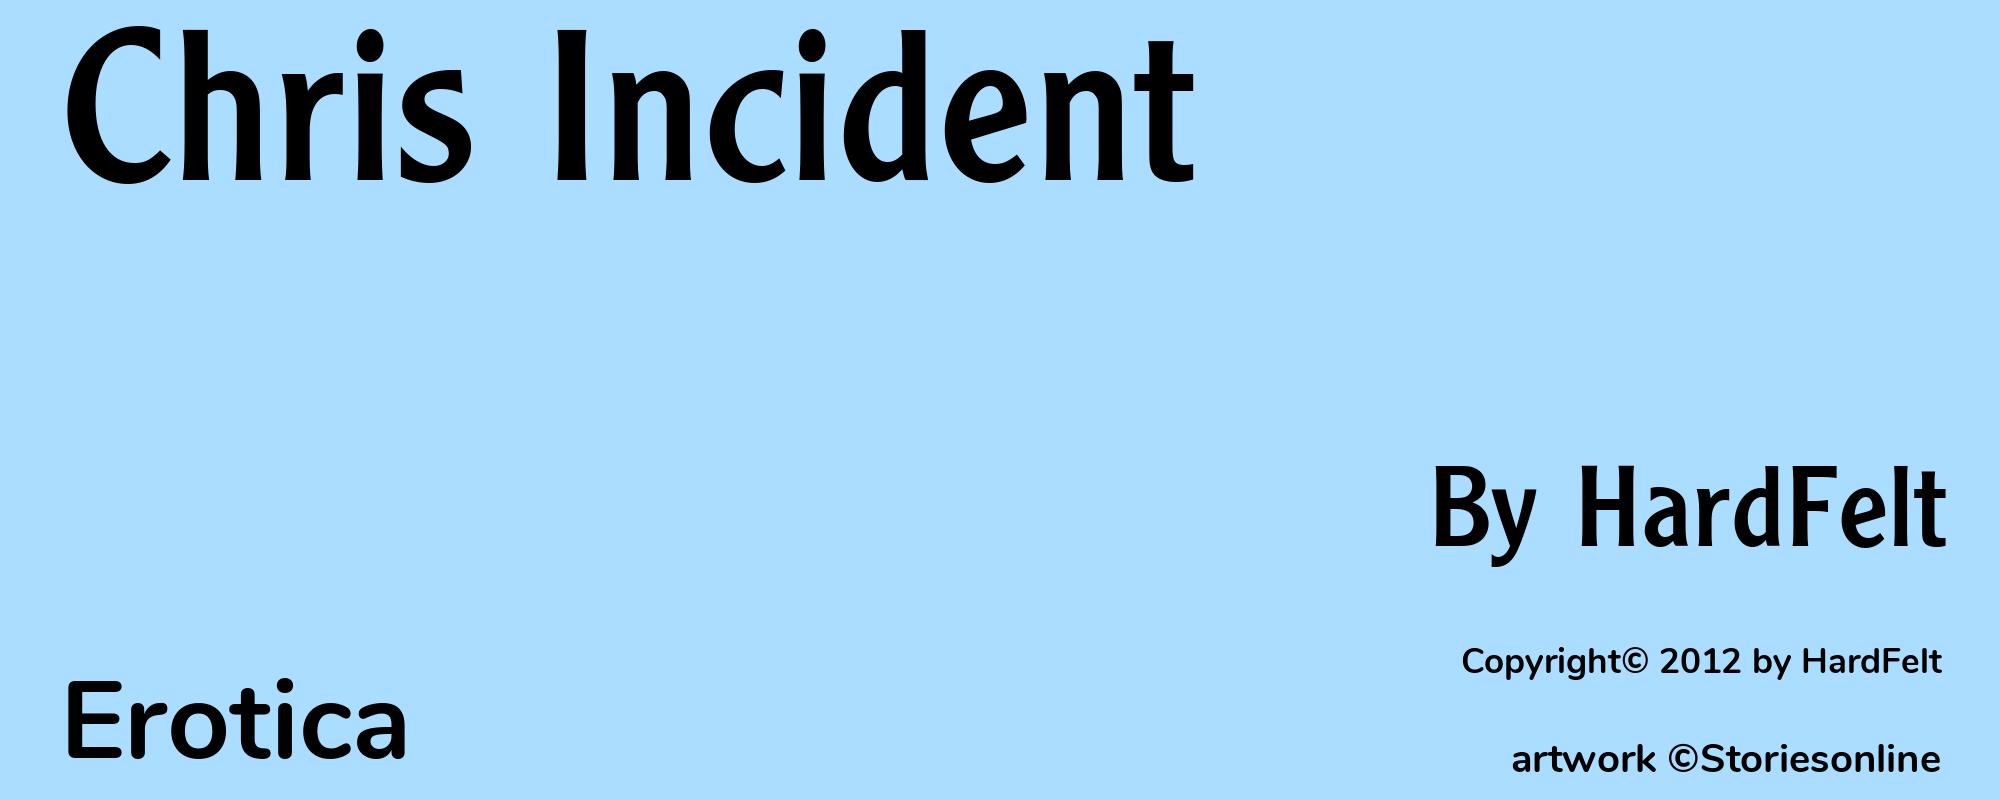 Chris Incident - Cover